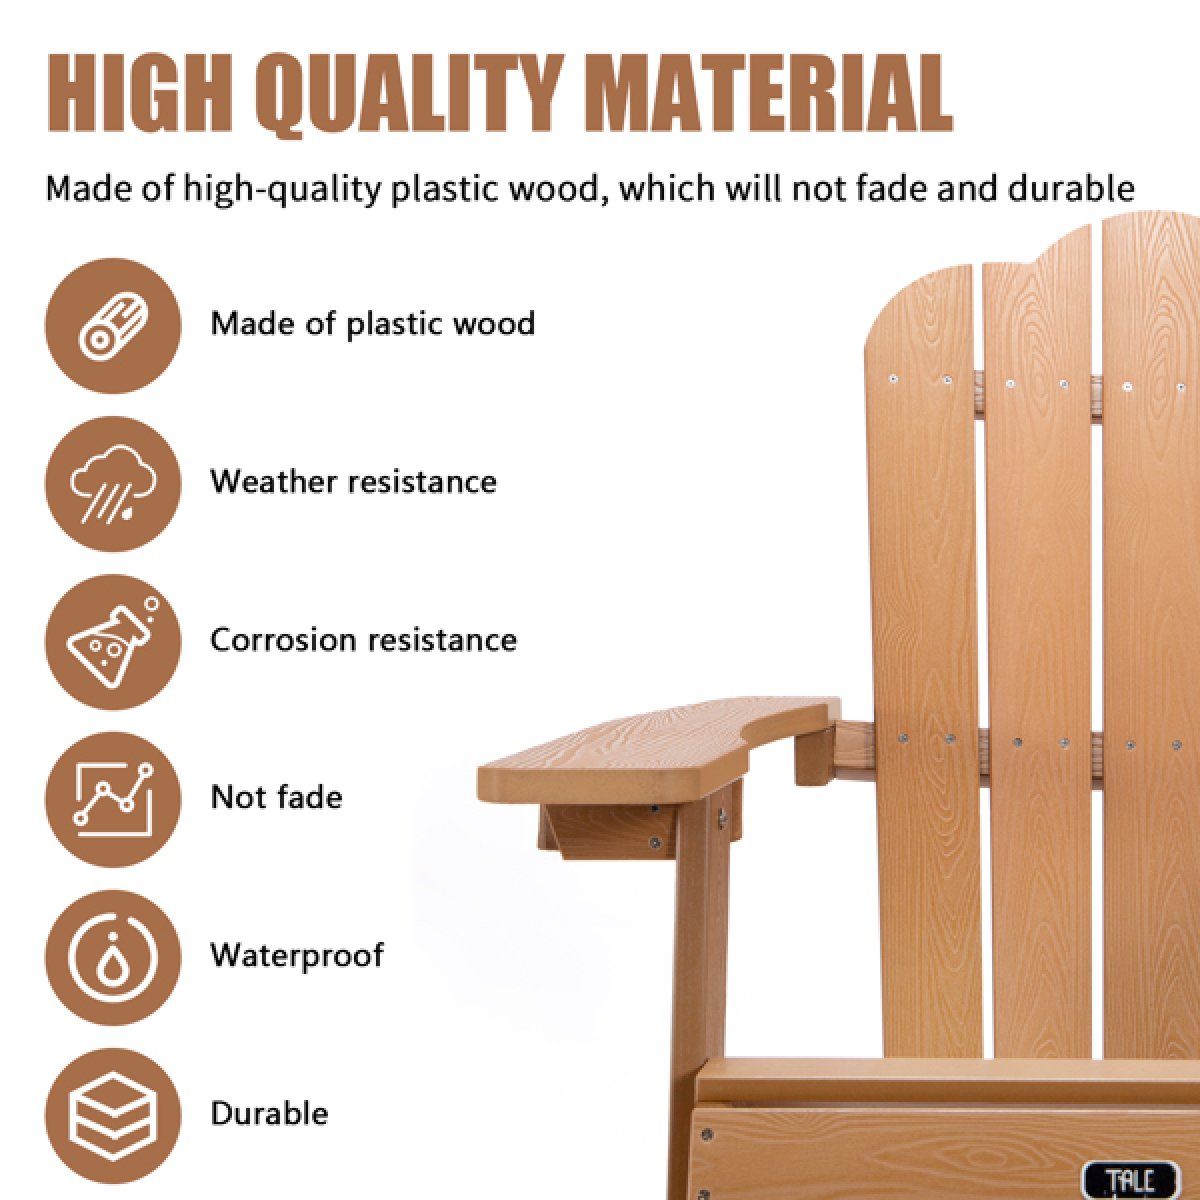 [Quick Delivery] Adirondack Chair, Outdoor Weather Resistant 380 lbs Capacity Load Plastic Patio Chairs for Pool Patio Deck Garden, Backyard Polystyrene Adirondack Chair,Brown - image 4 of 14